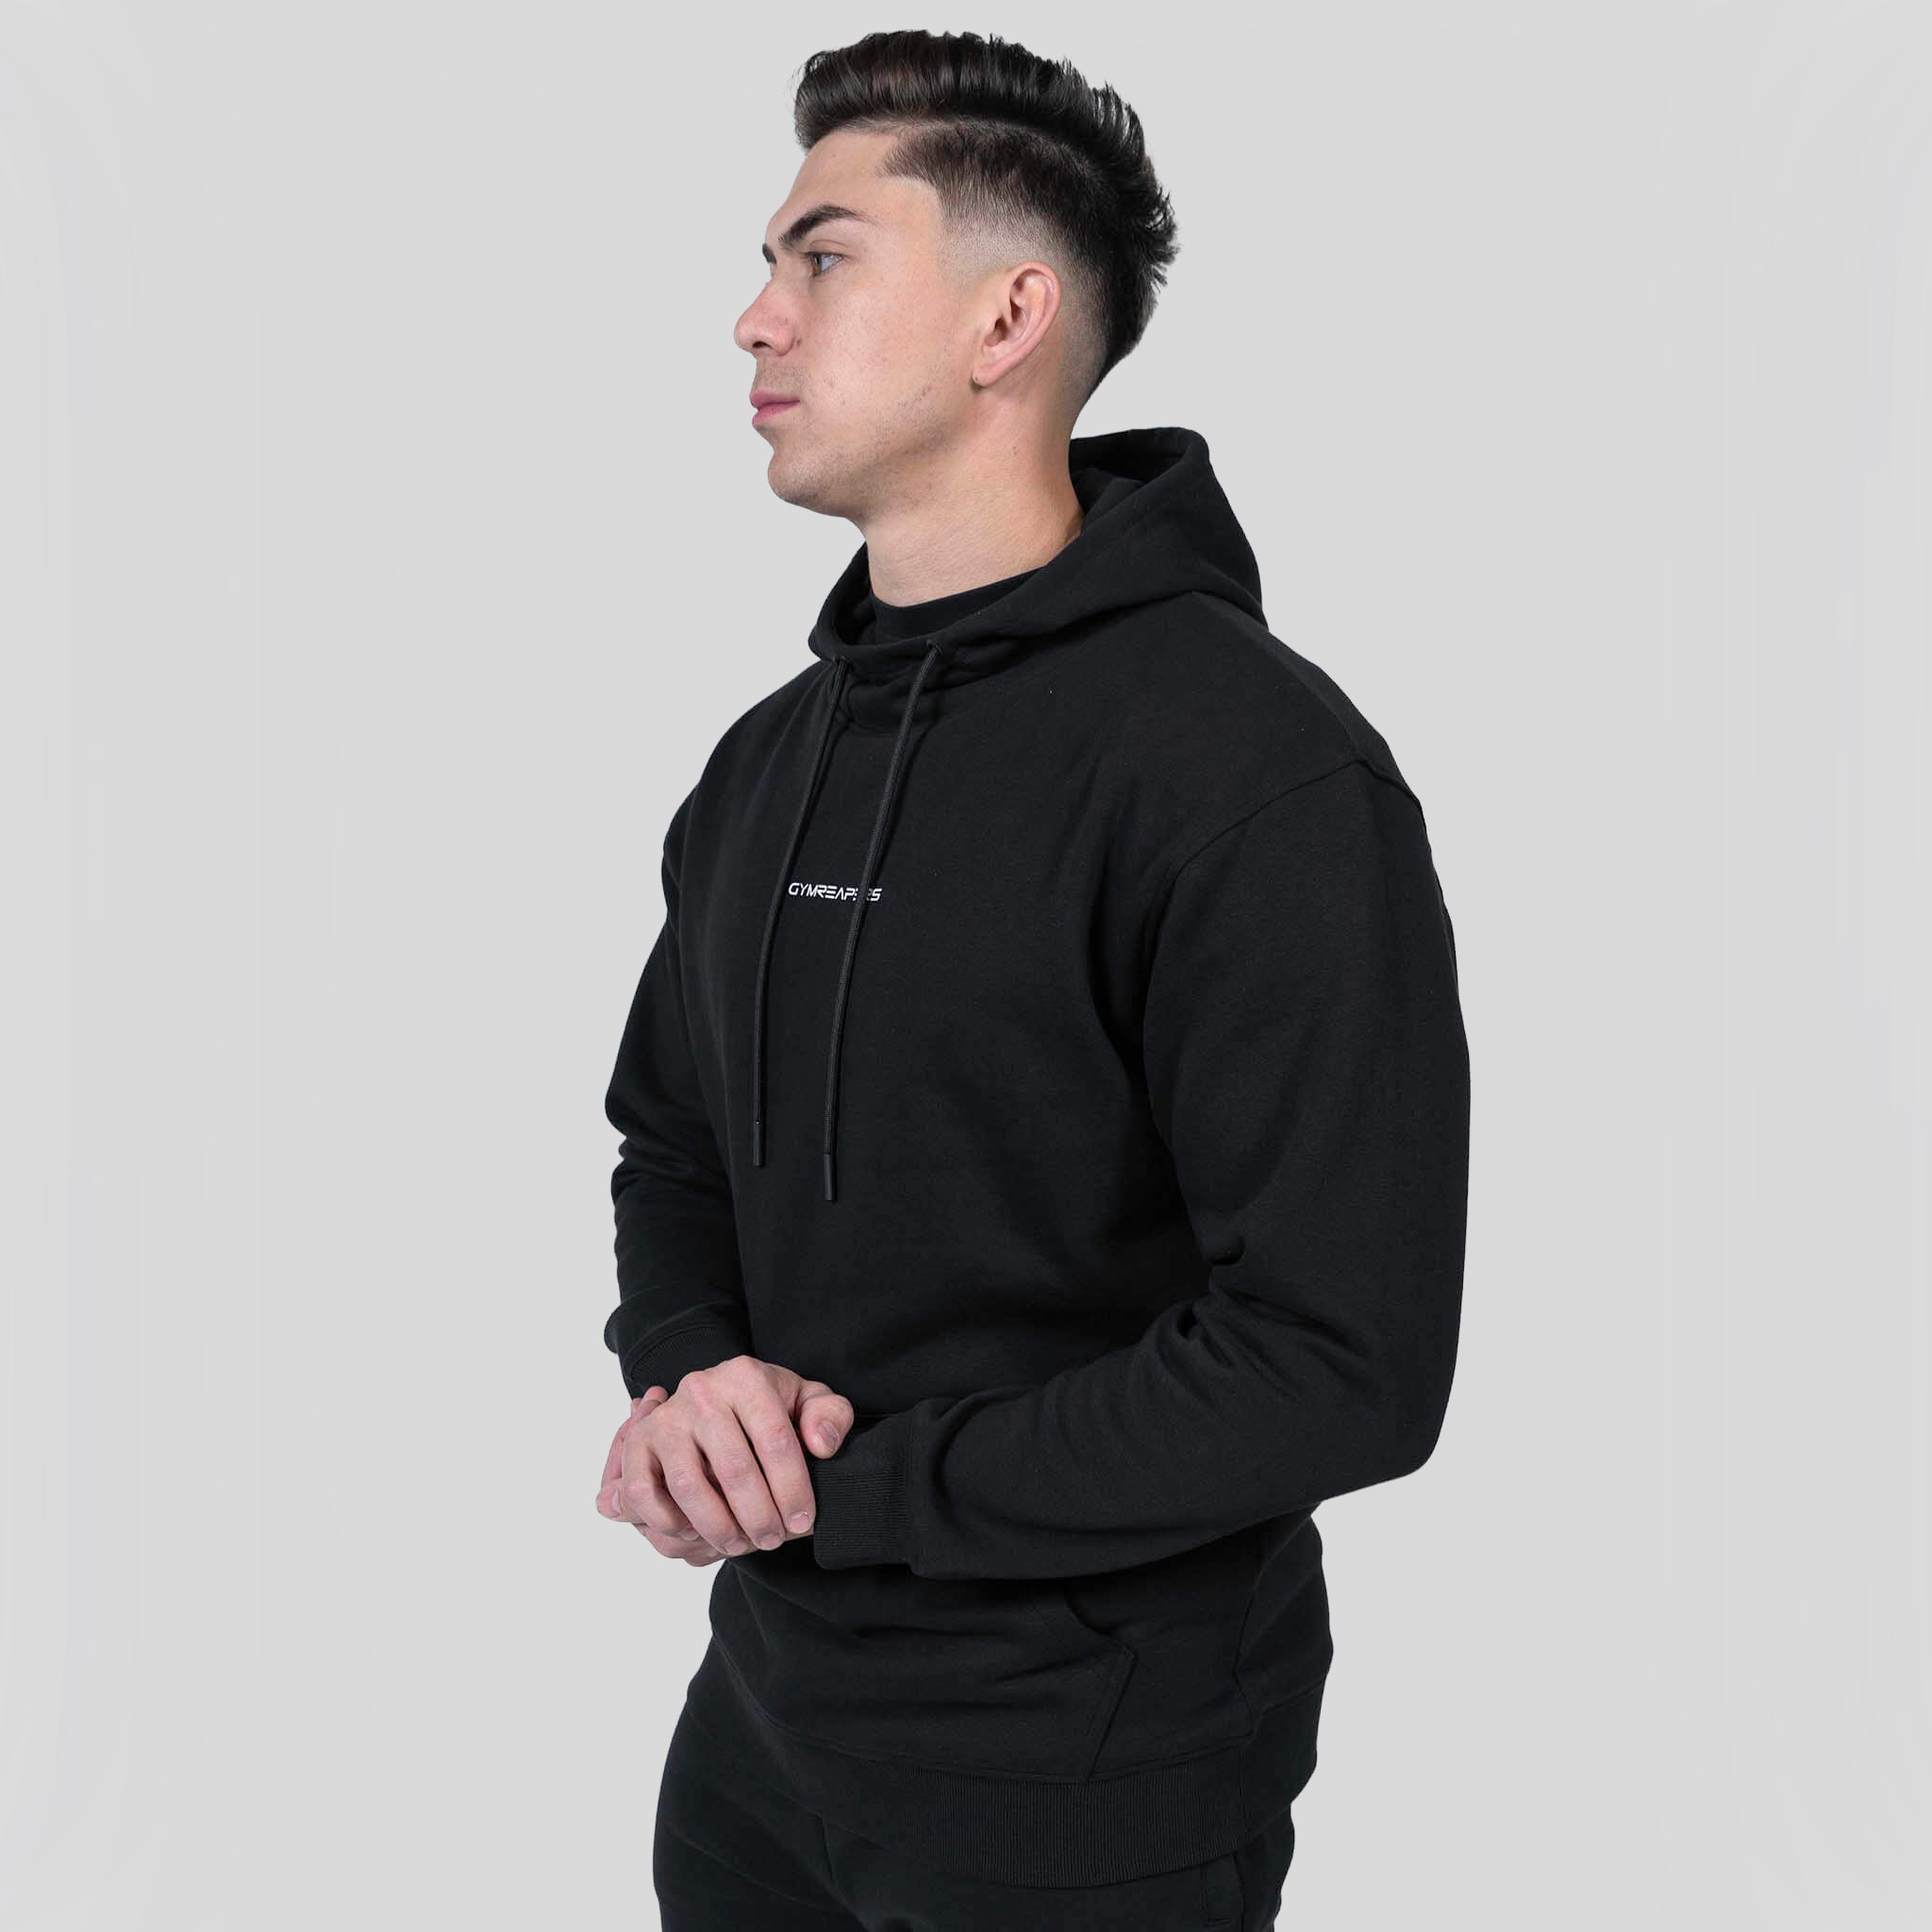 ascend hoodie black white side lifestyle